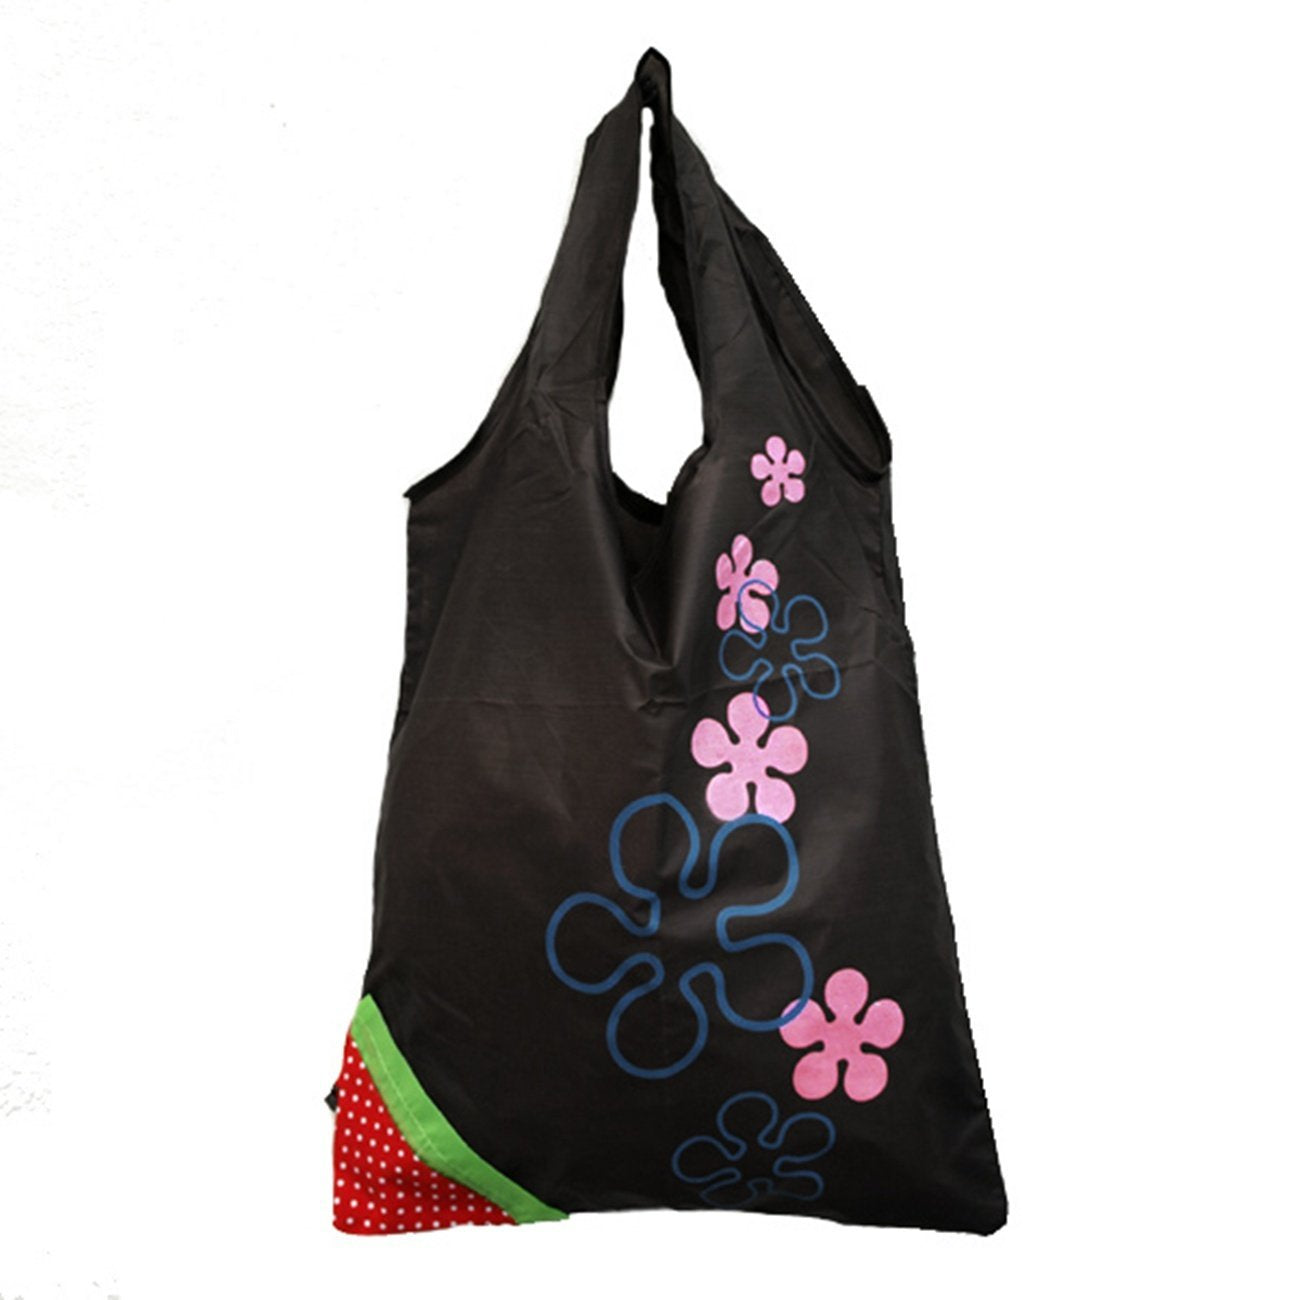 Reusable Shopping Tote Bag that Folds into a Strawberry